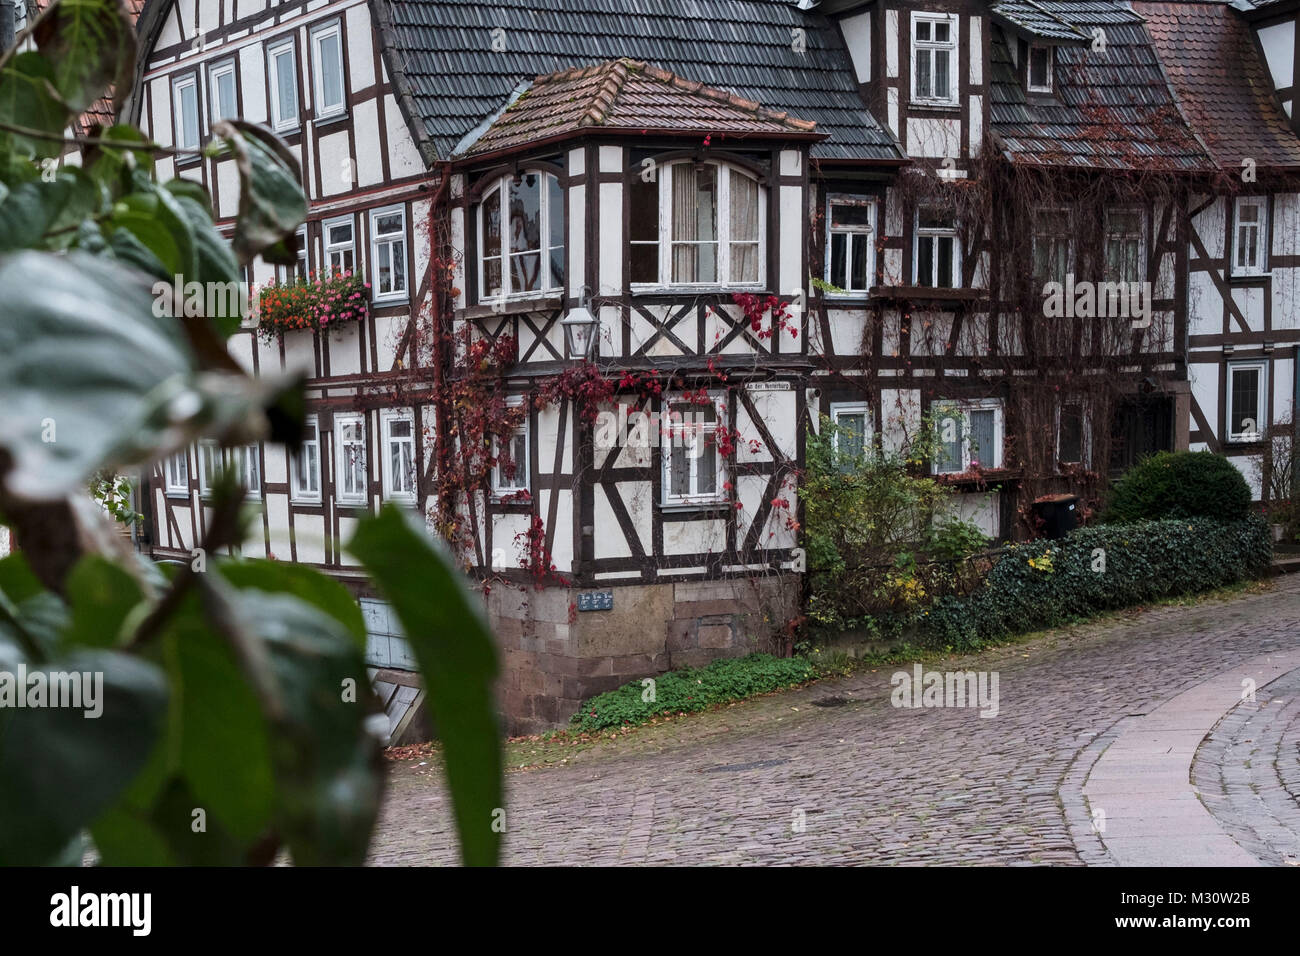 Fachwerkstrasse High Resolution Stock Photography and Images - Alamy